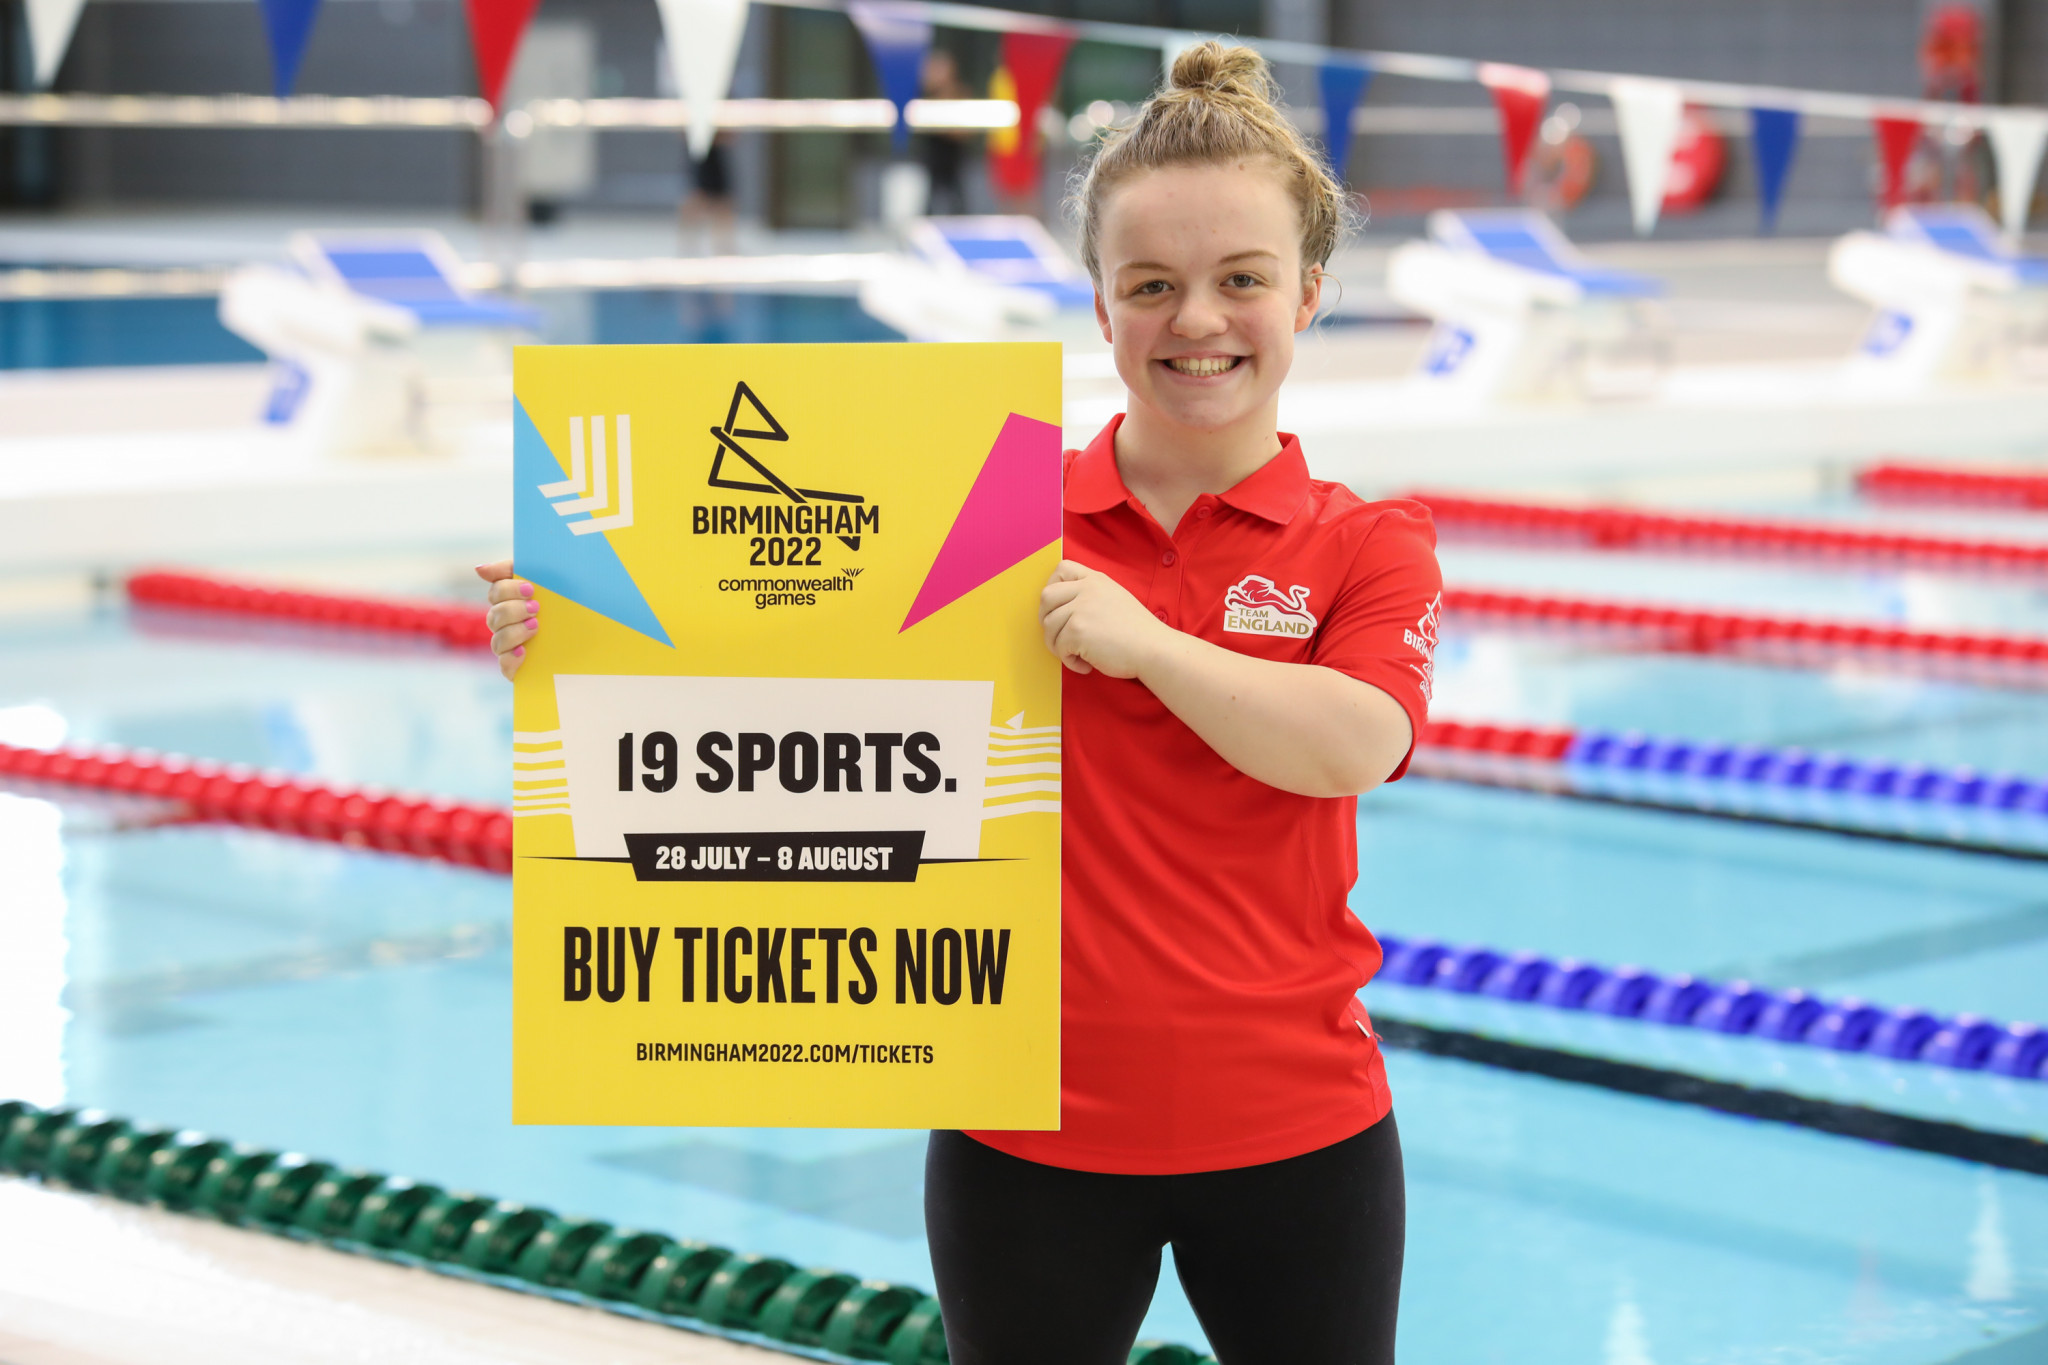 Maisie Summers-Newton is looking forward to competing in front of a loud home crowd at Birmingham 2022 ©Birmingham 2022